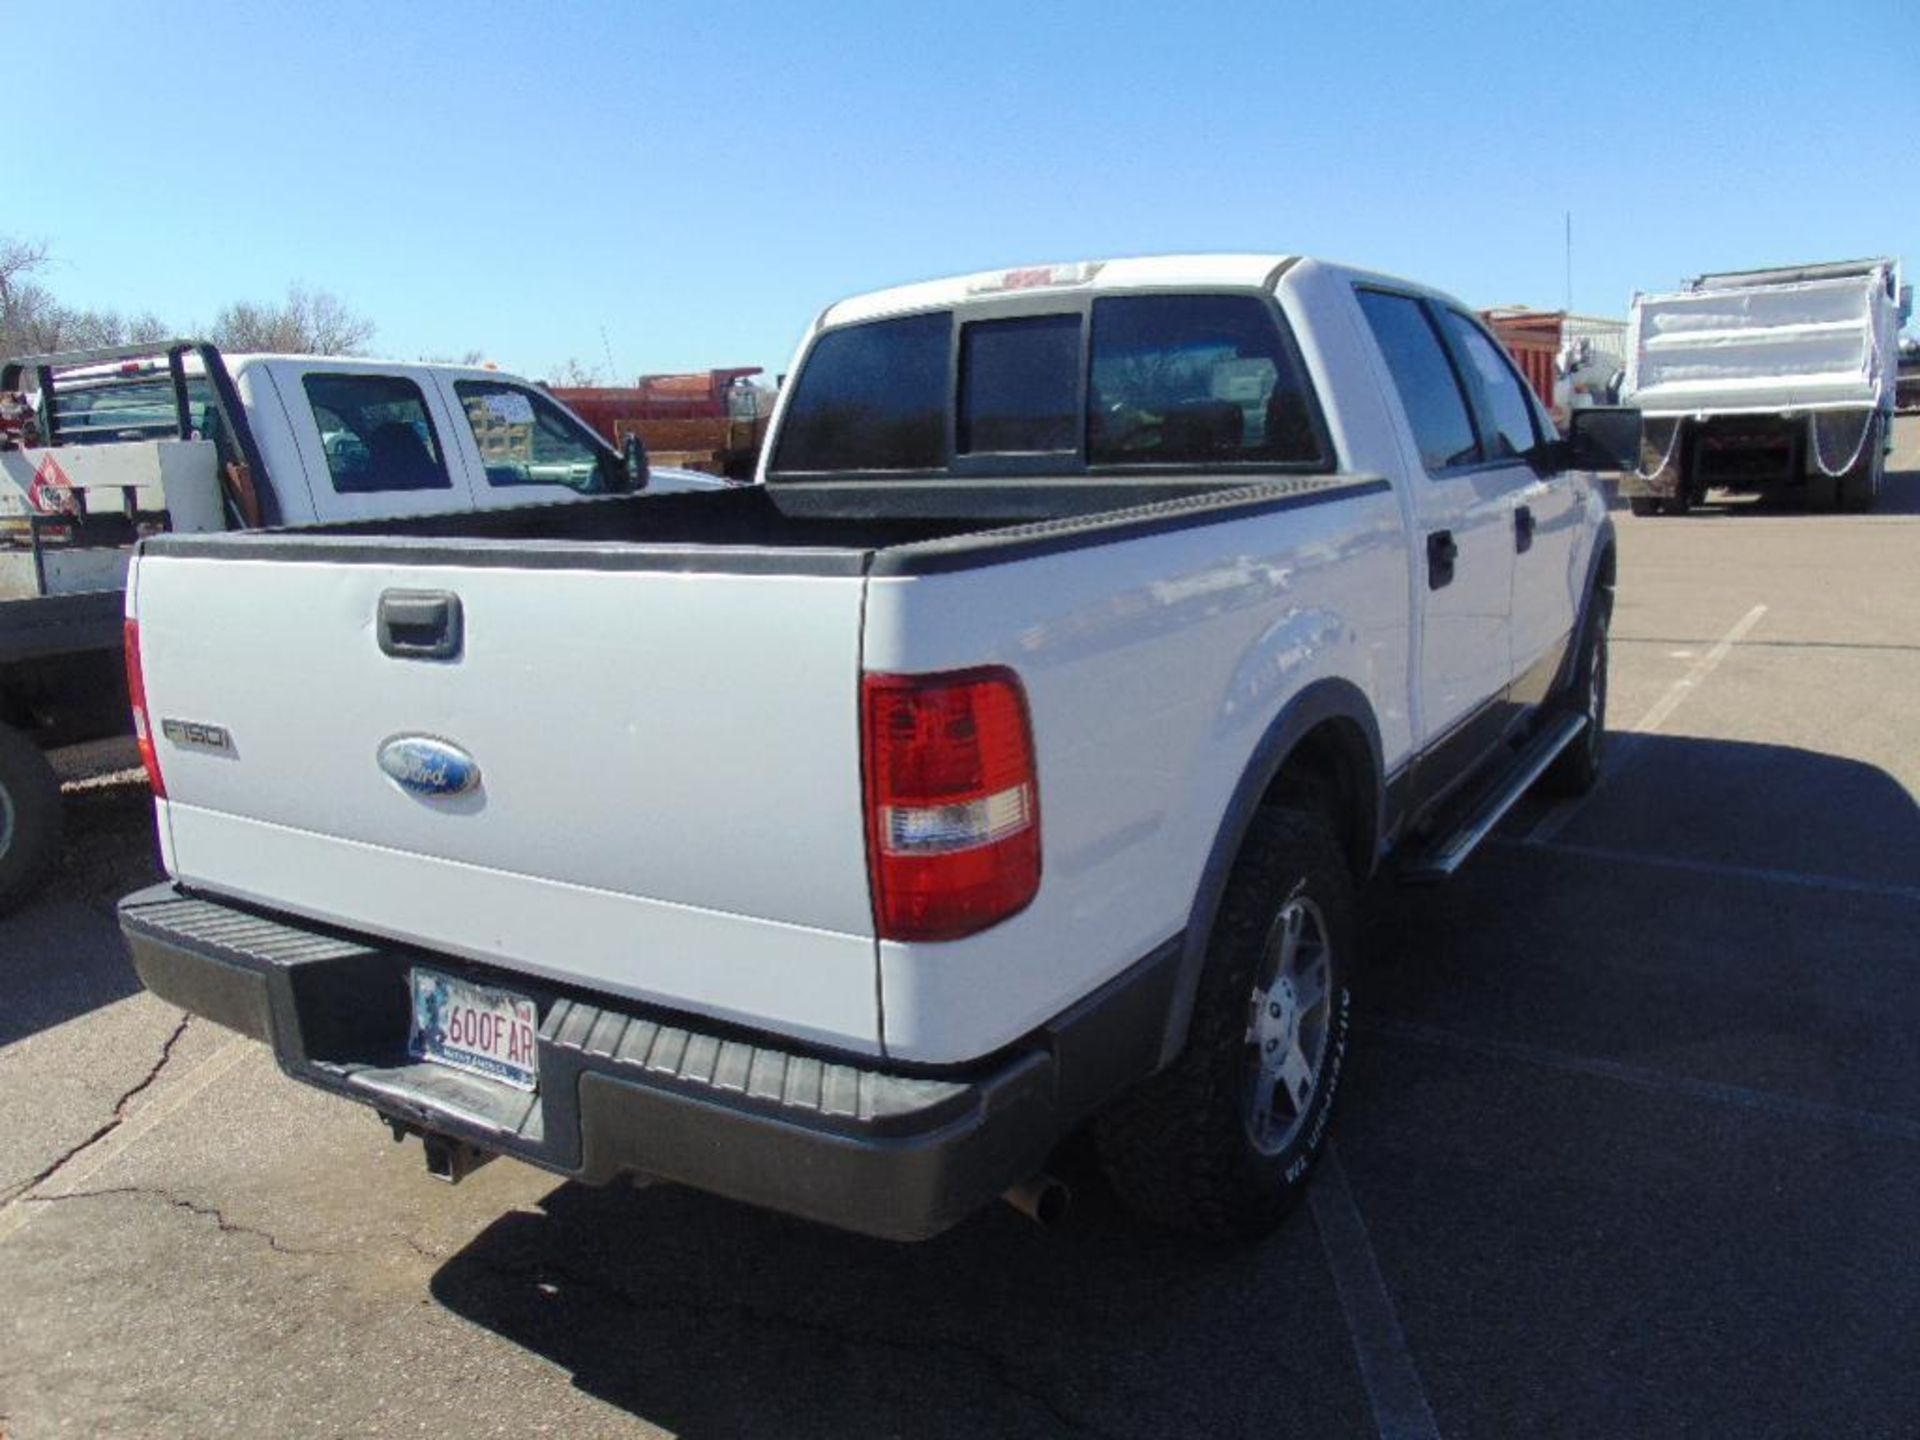 2007 Ford F150 4x4 Crewcab Pickup s/n 1ftpw14v97kd17198, v8 gas eng,auto trans, od reads 315729 - Image 3 of 7